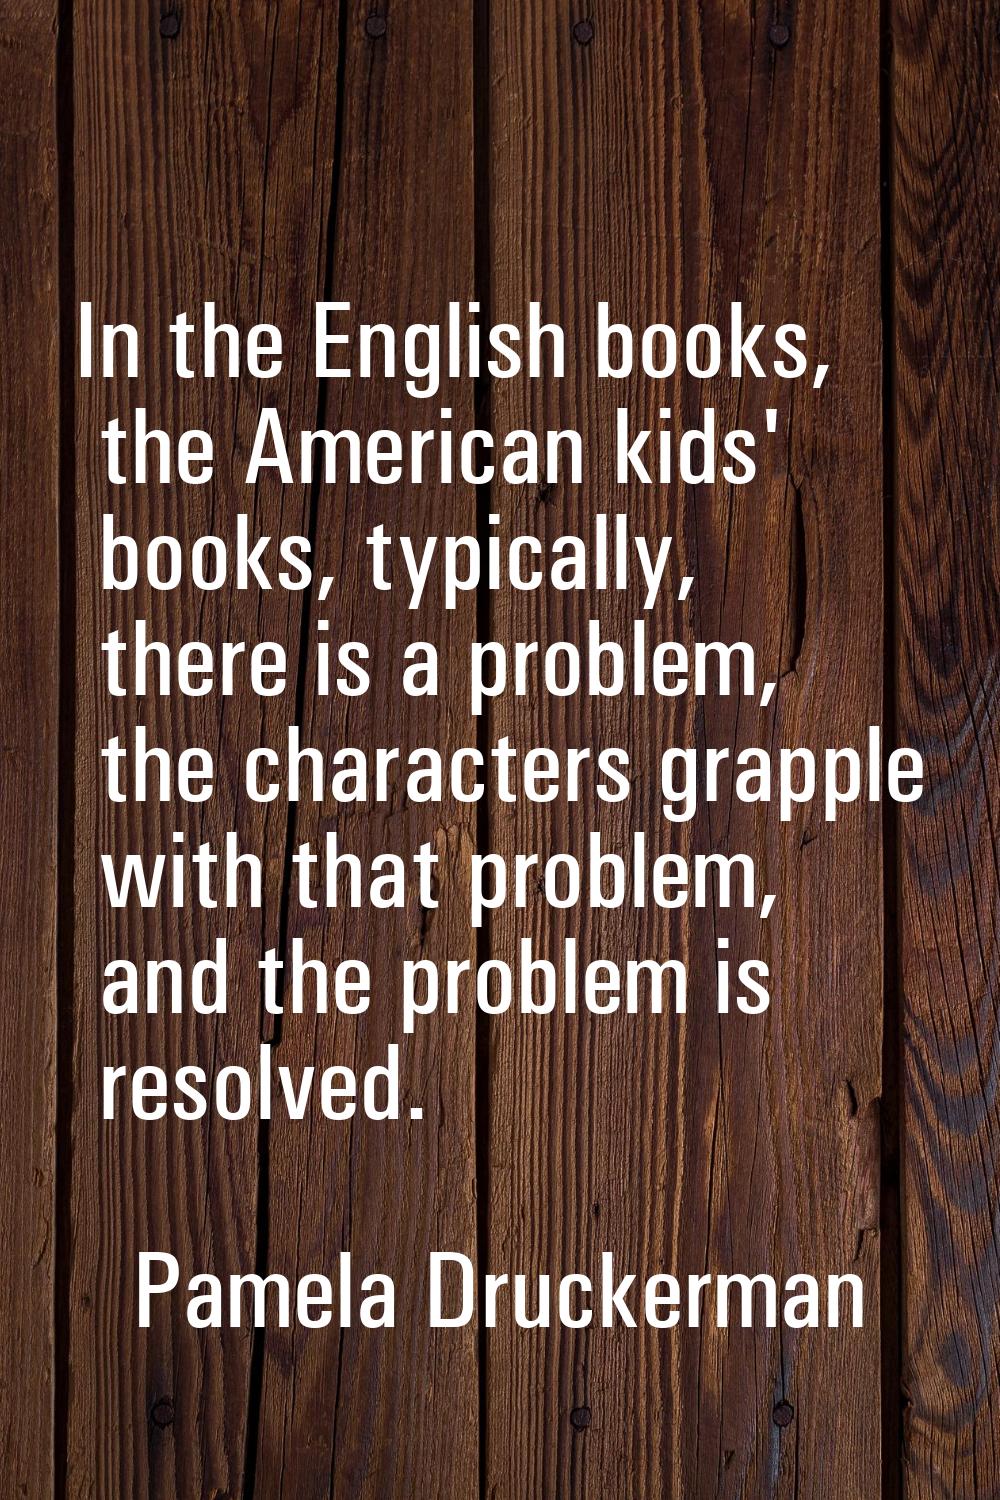 In the English books, the American kids' books, typically, there is a problem, the characters grapp